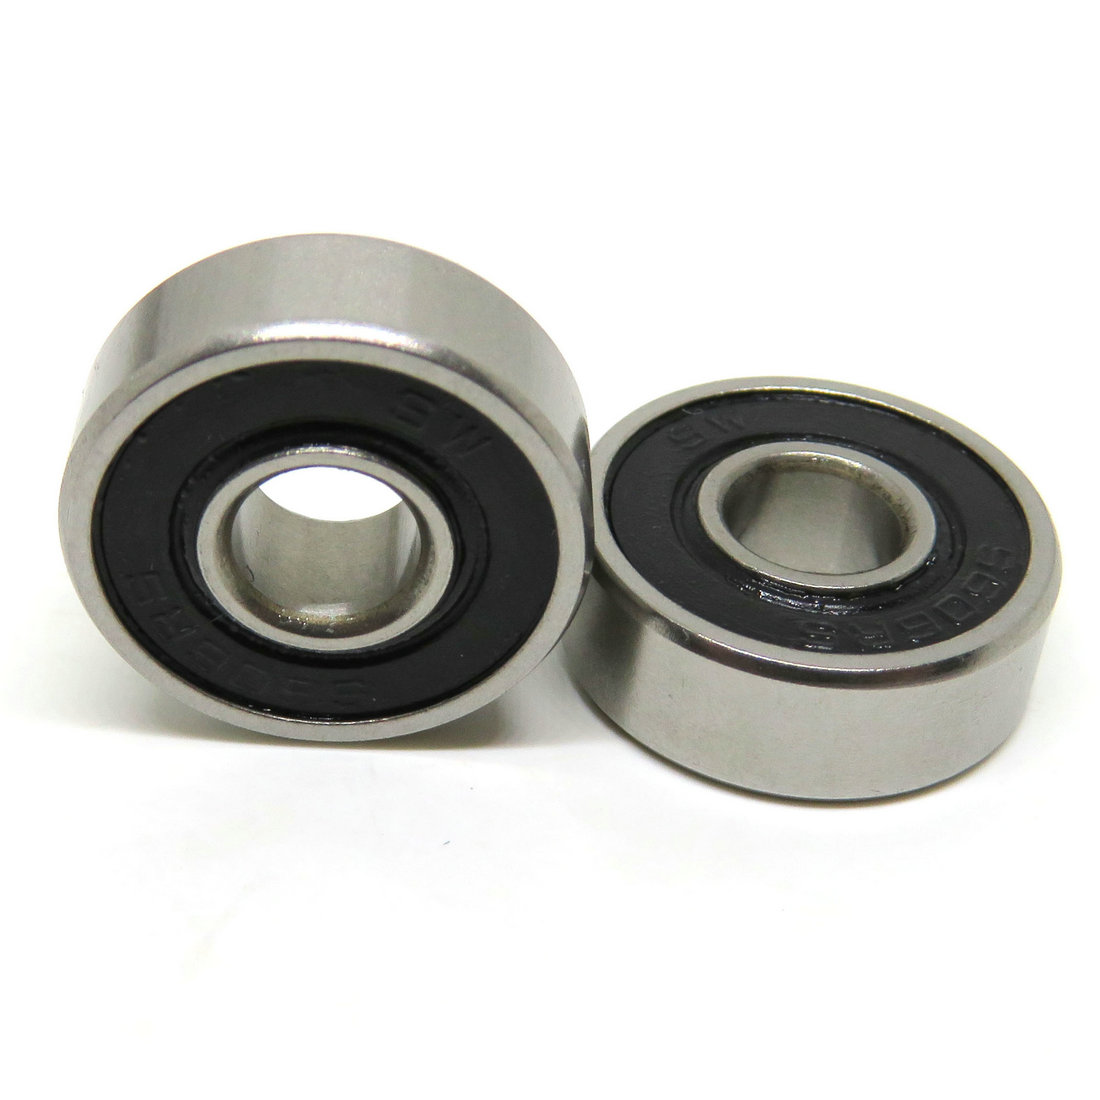 Power Transmission Products S605RS 6x17x7mm Rubber Sealed Stainless Steel Ball Bearing S605 2RS.jpg